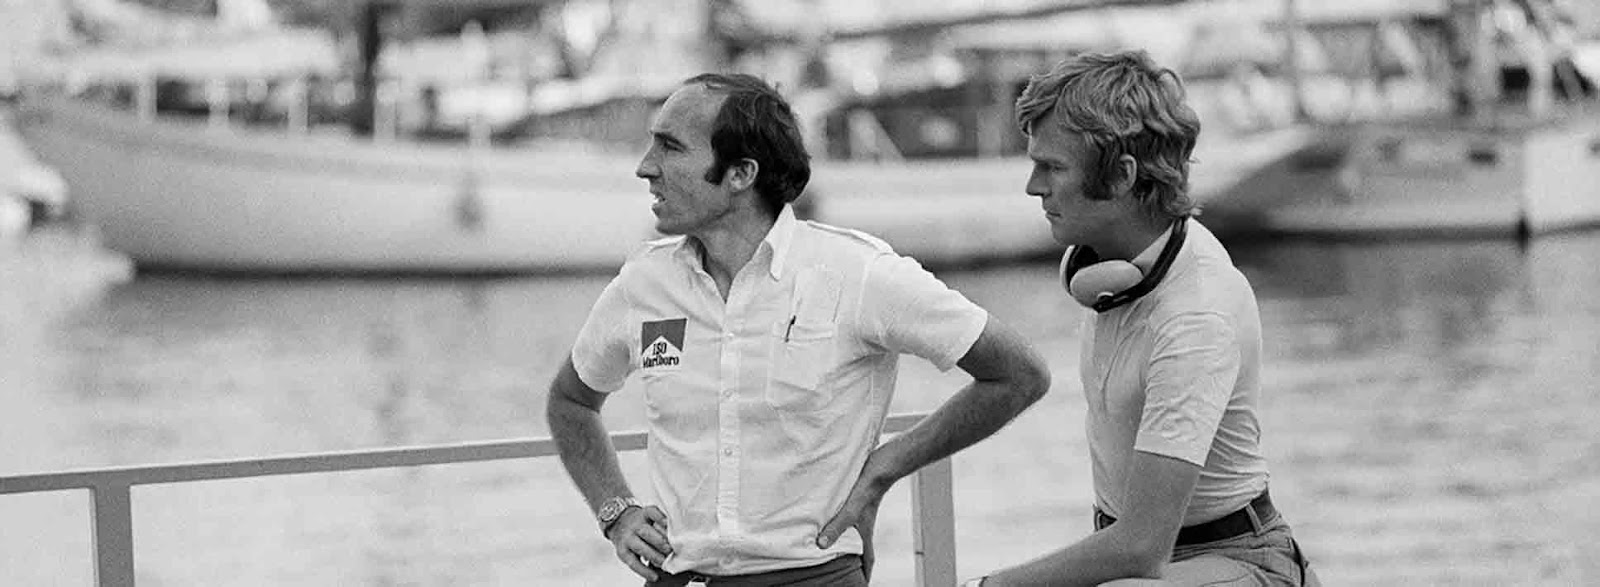 Sir Frank Williams and Max Mosley.